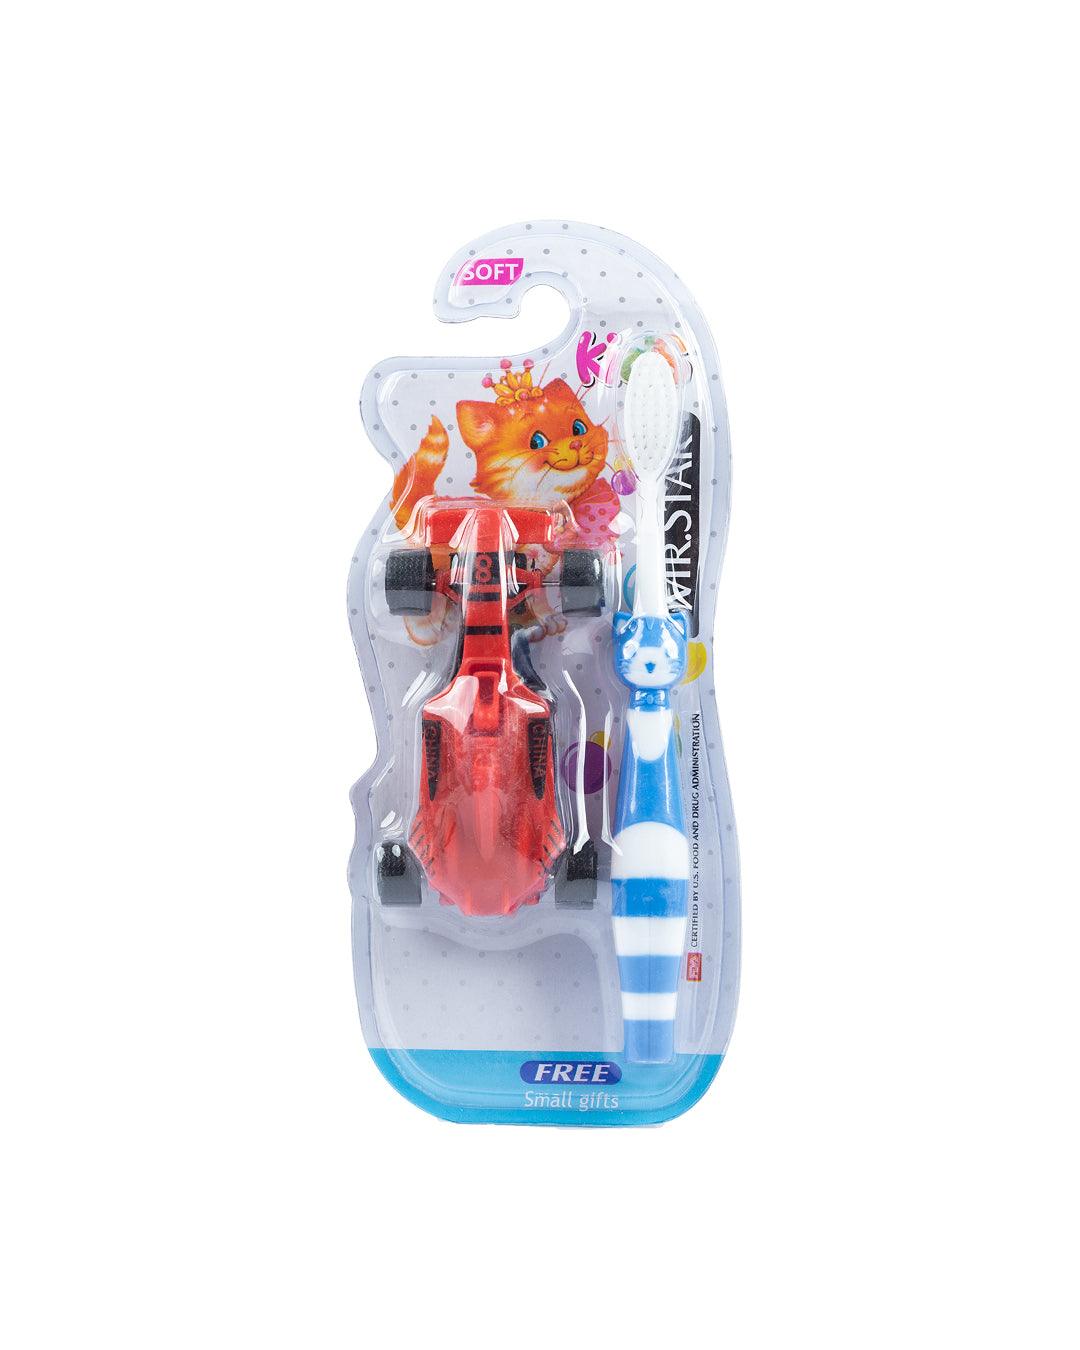 Soft Bristles Kid Compact Toothbrush with Toy Car, Red, Plastic - MARKET 99